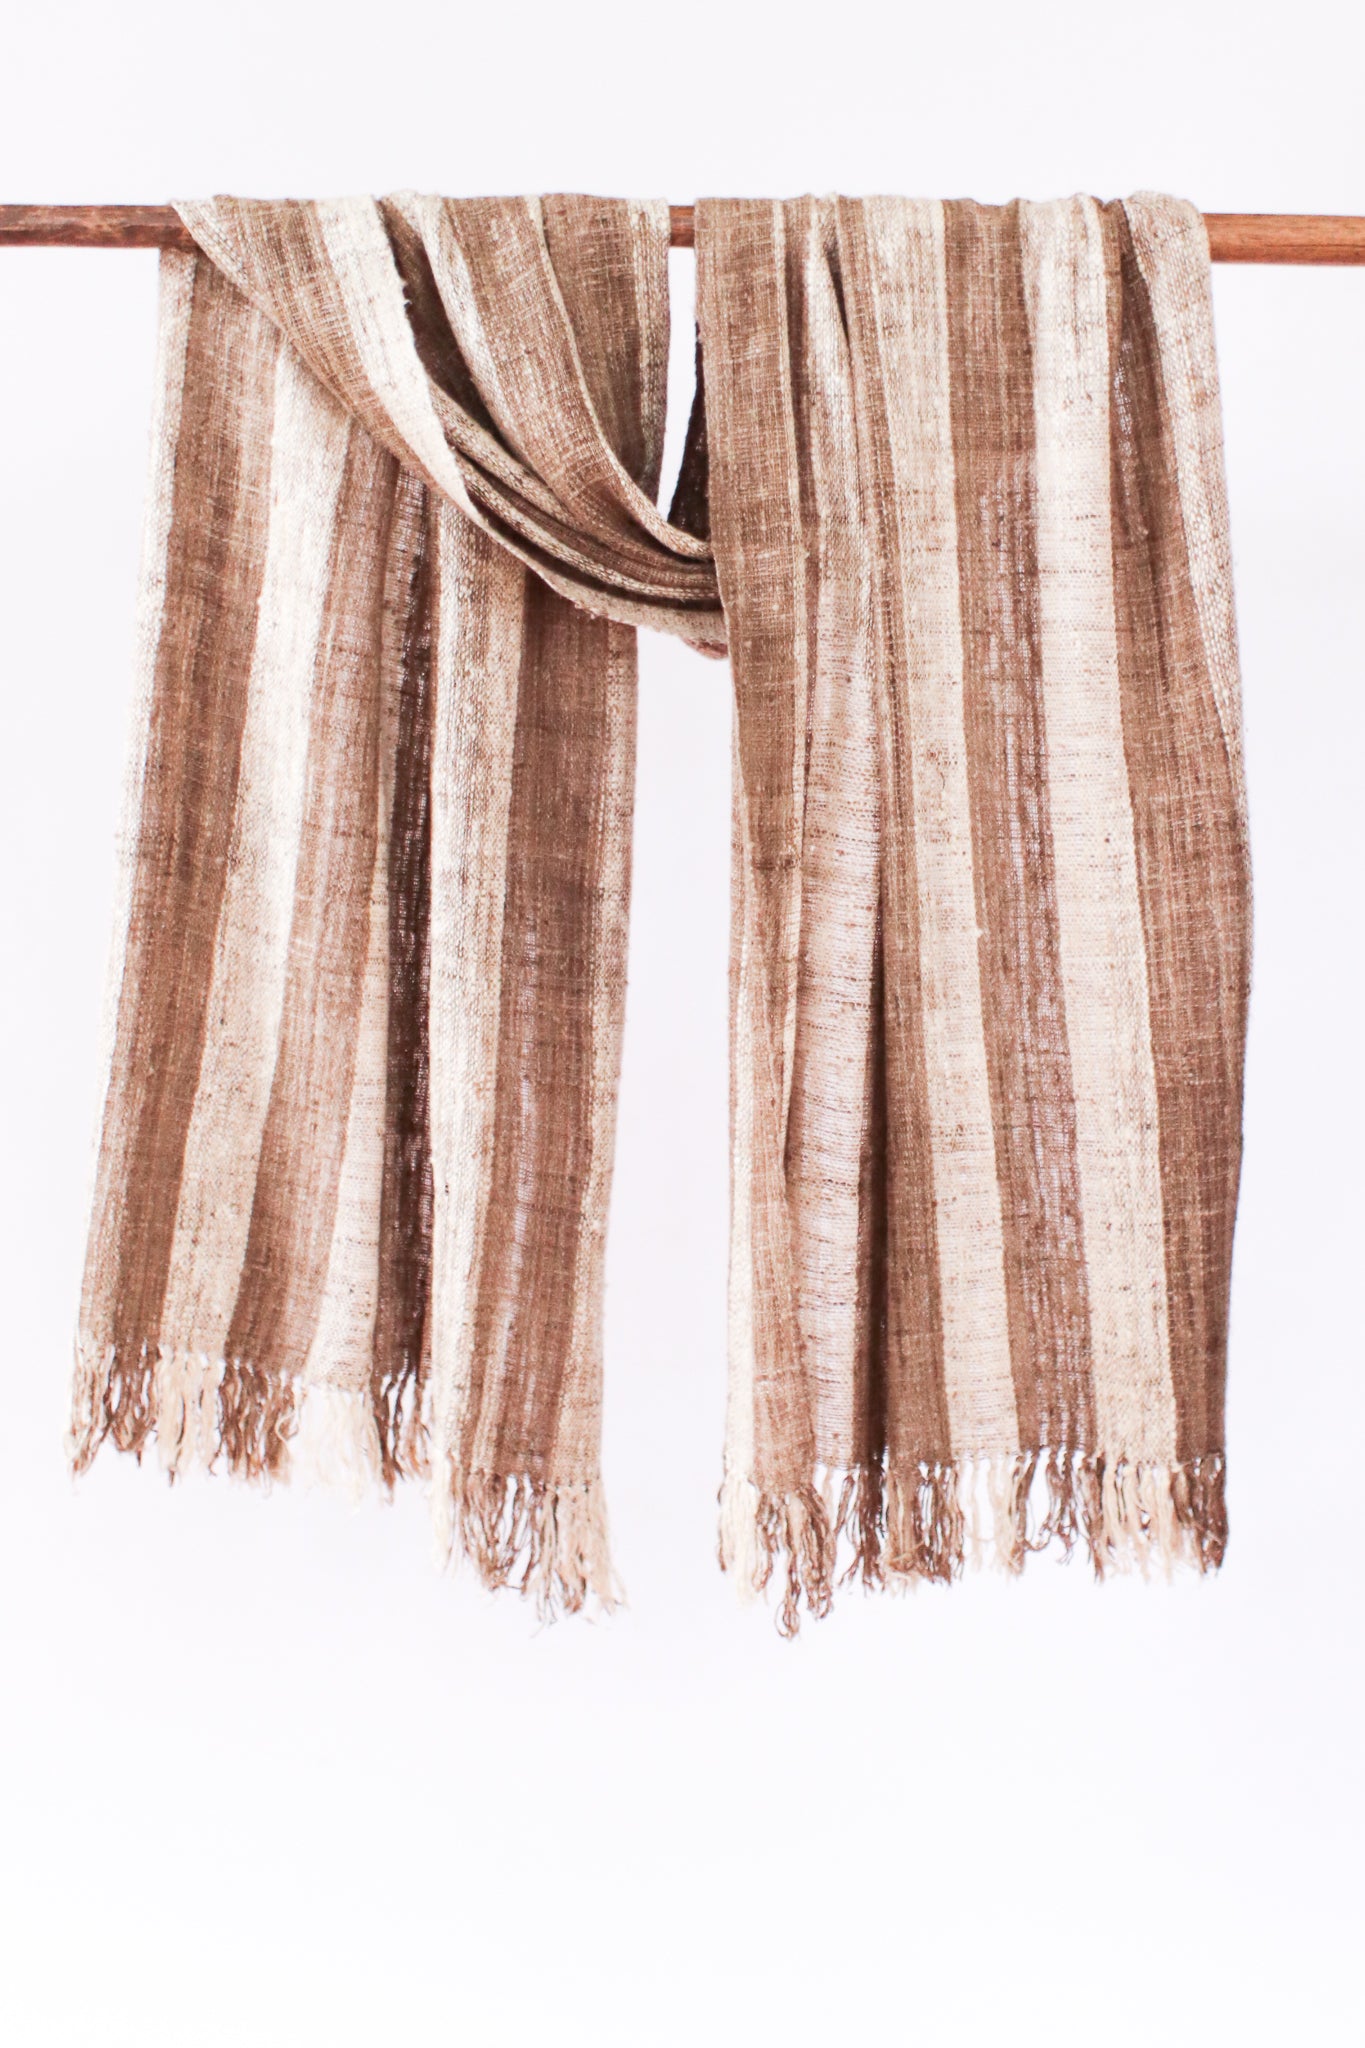 Wild Silk Scarf Natural + Sun Bleached, Large